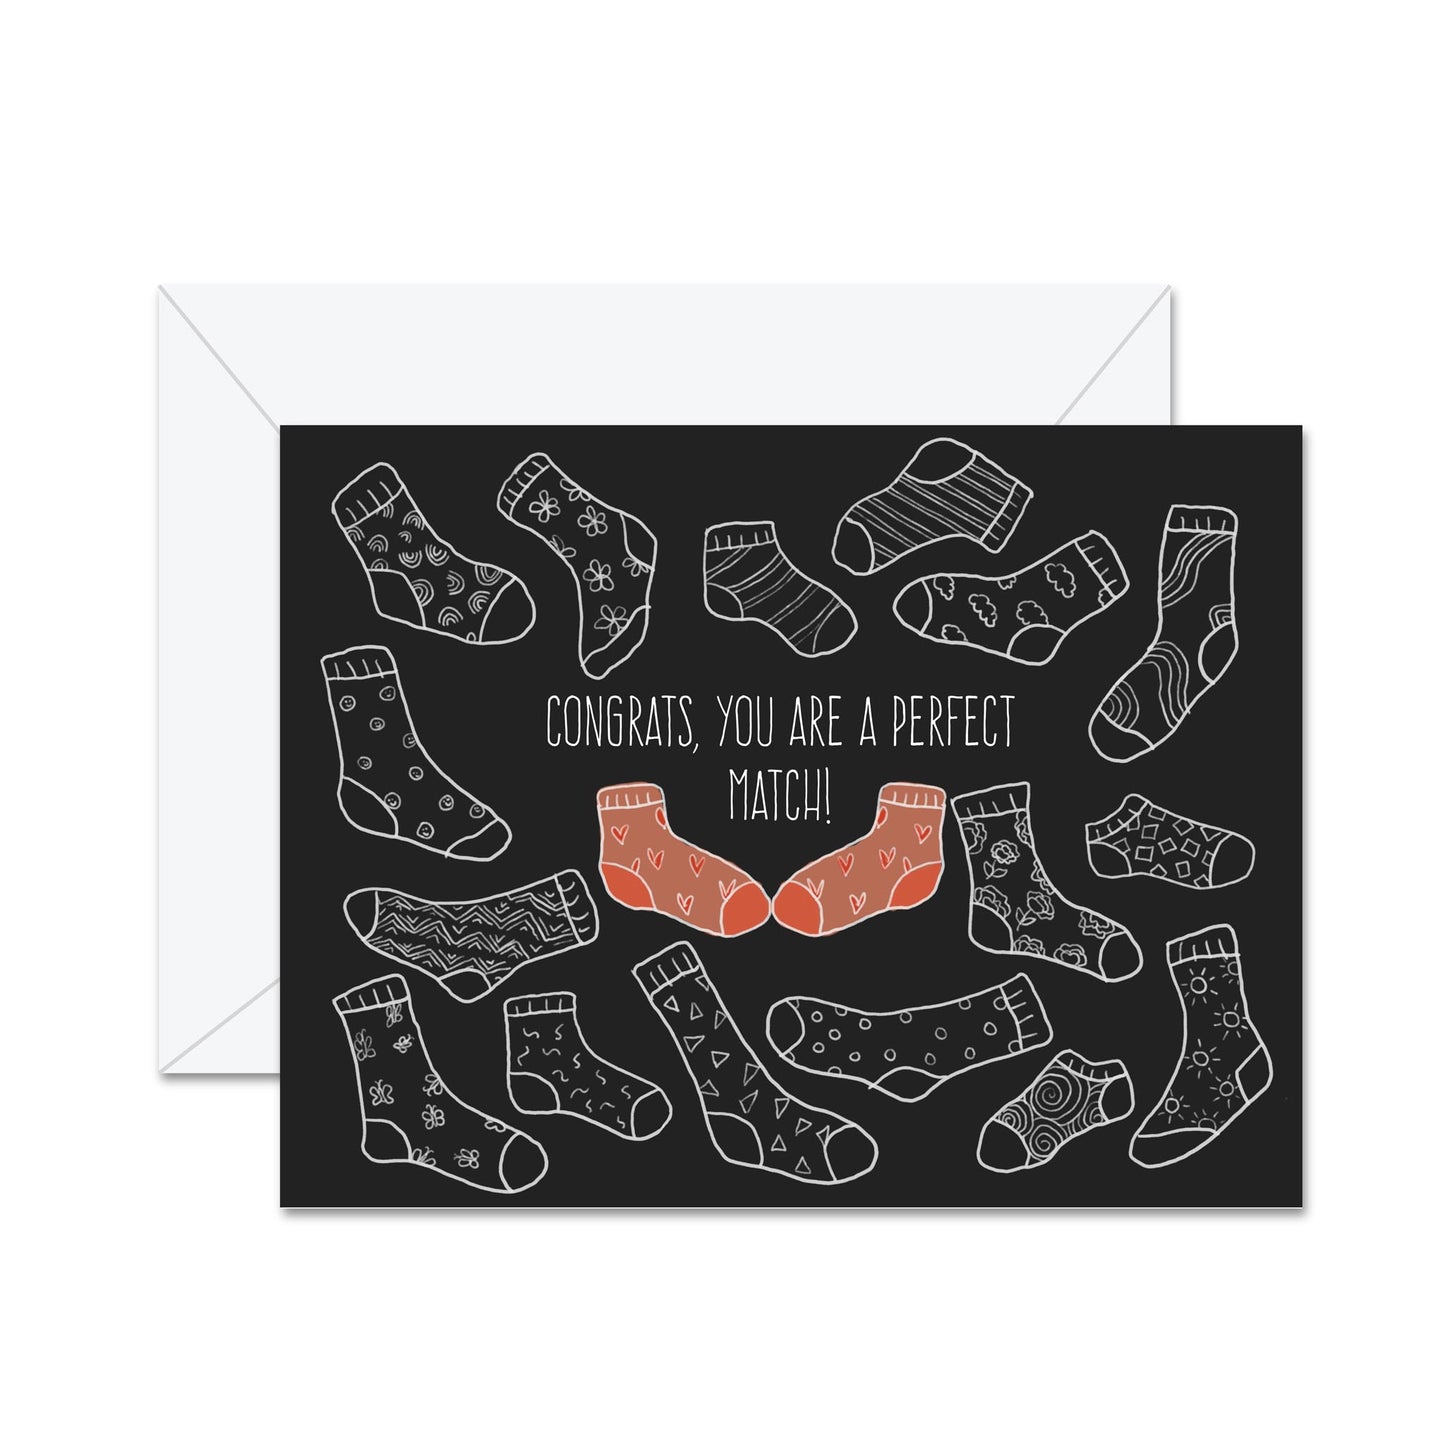 Congrats, You Are A Perfect Match! - Greeting Card